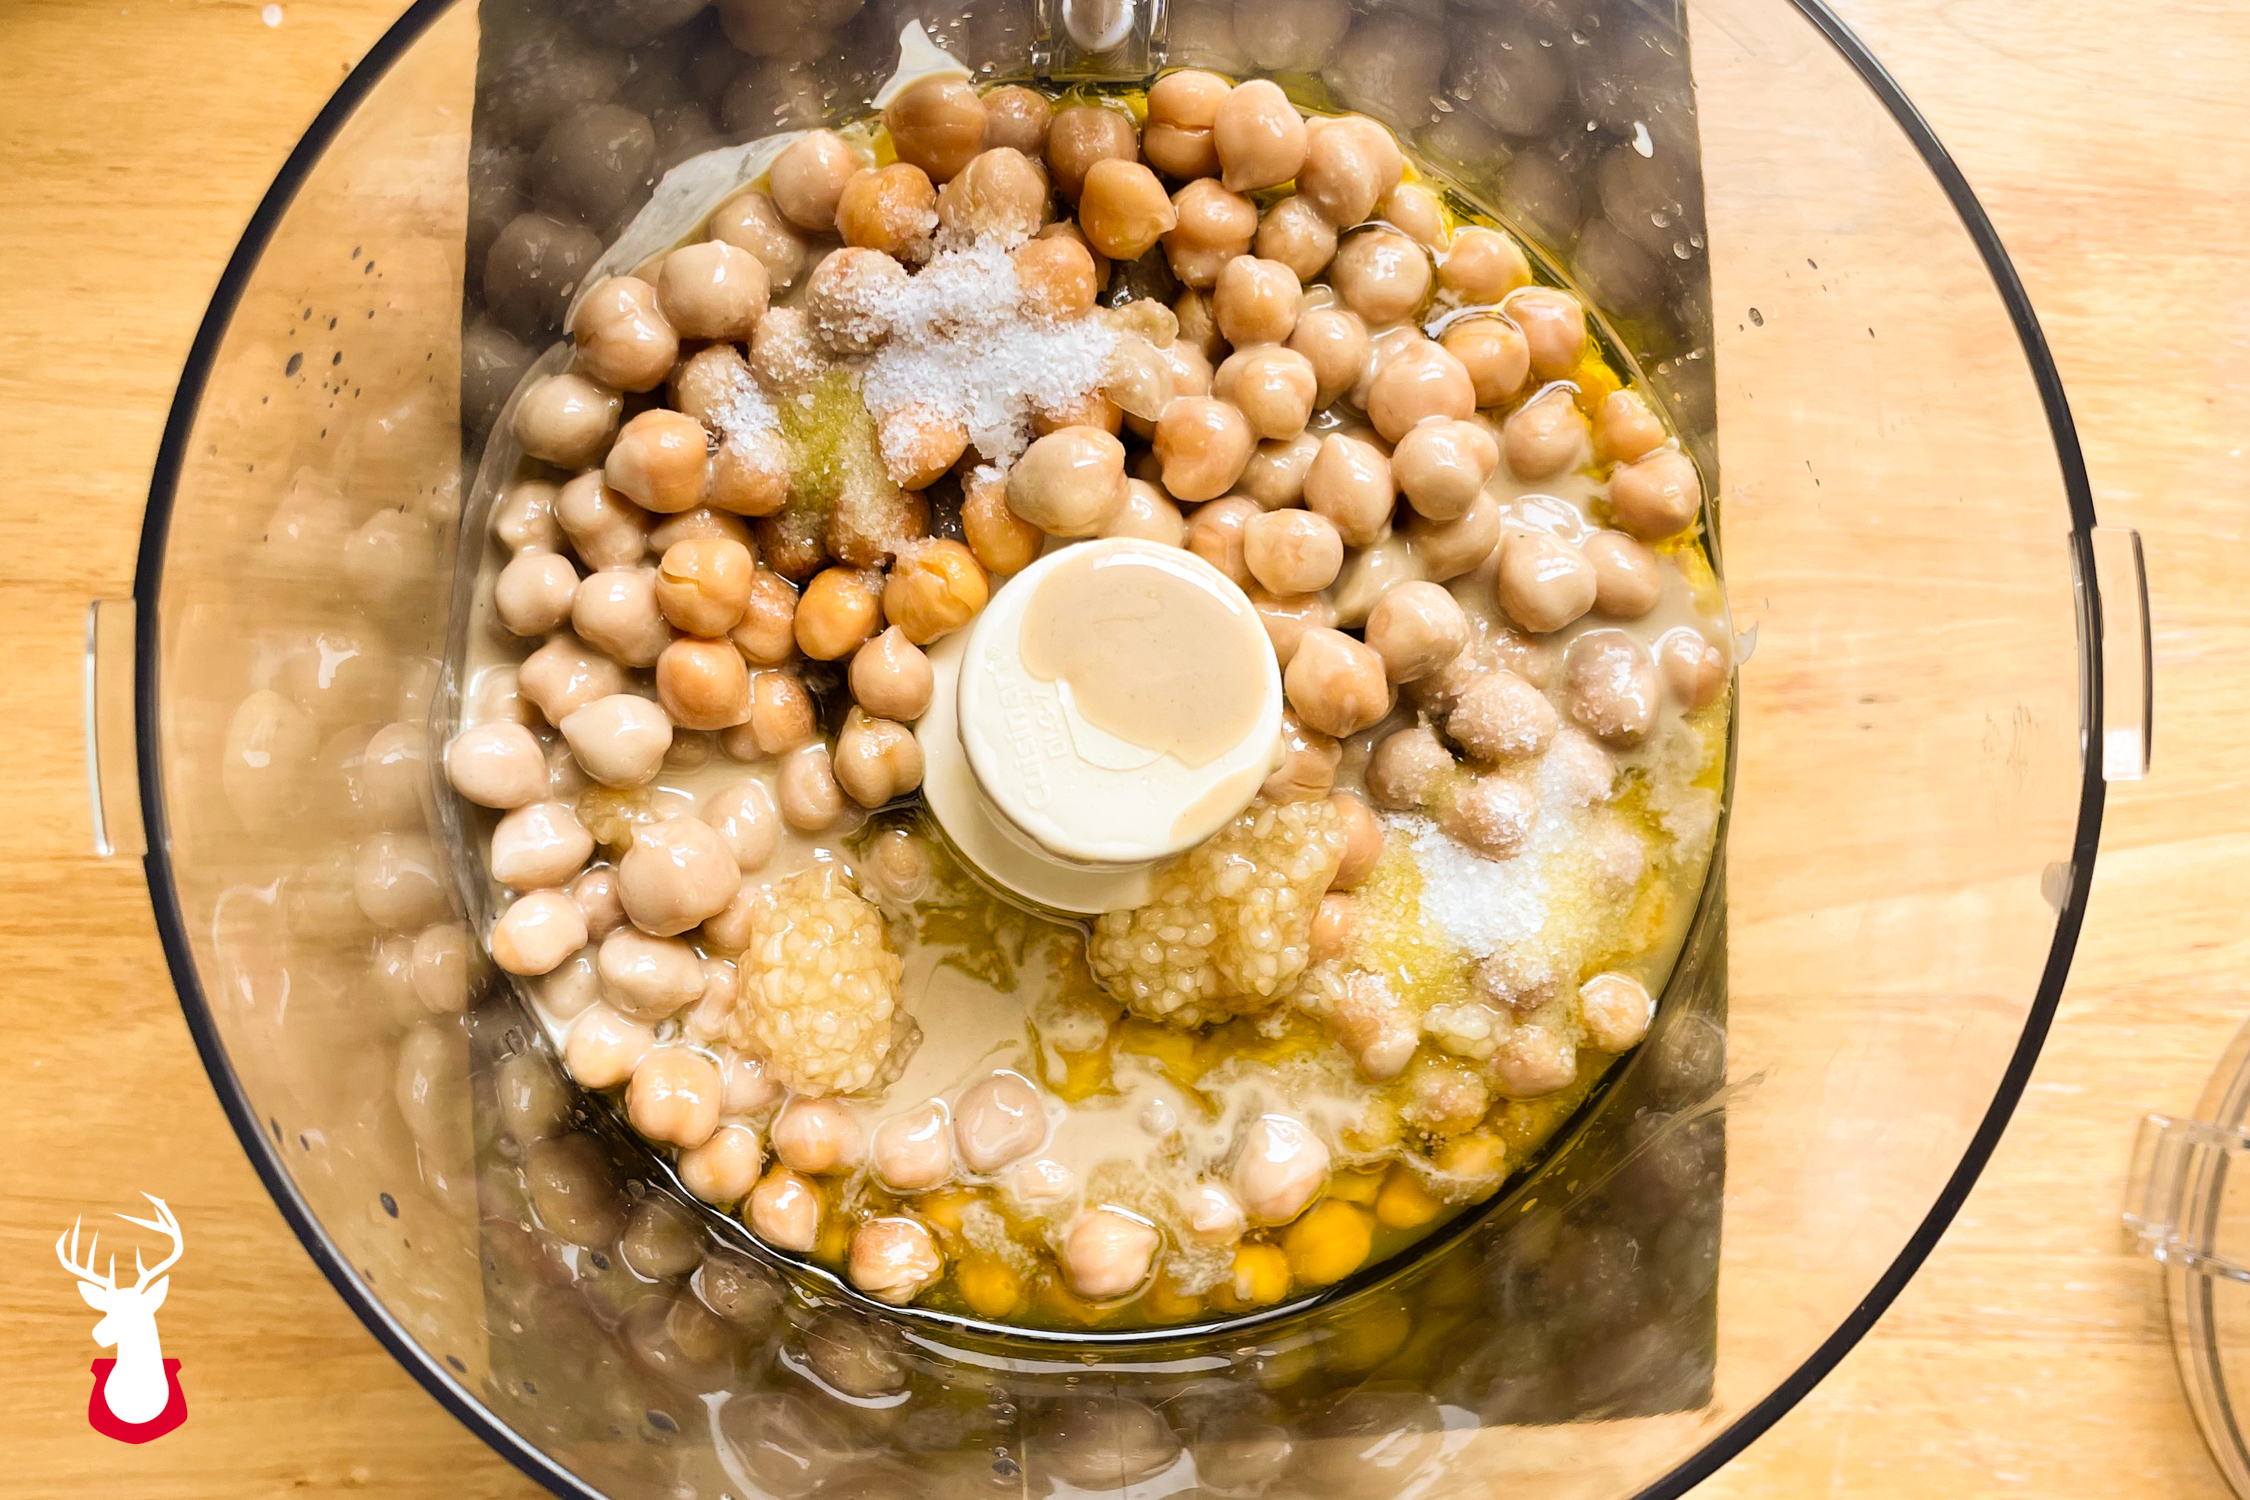 Overhead photo of chickpeas about to be blended into hummus.